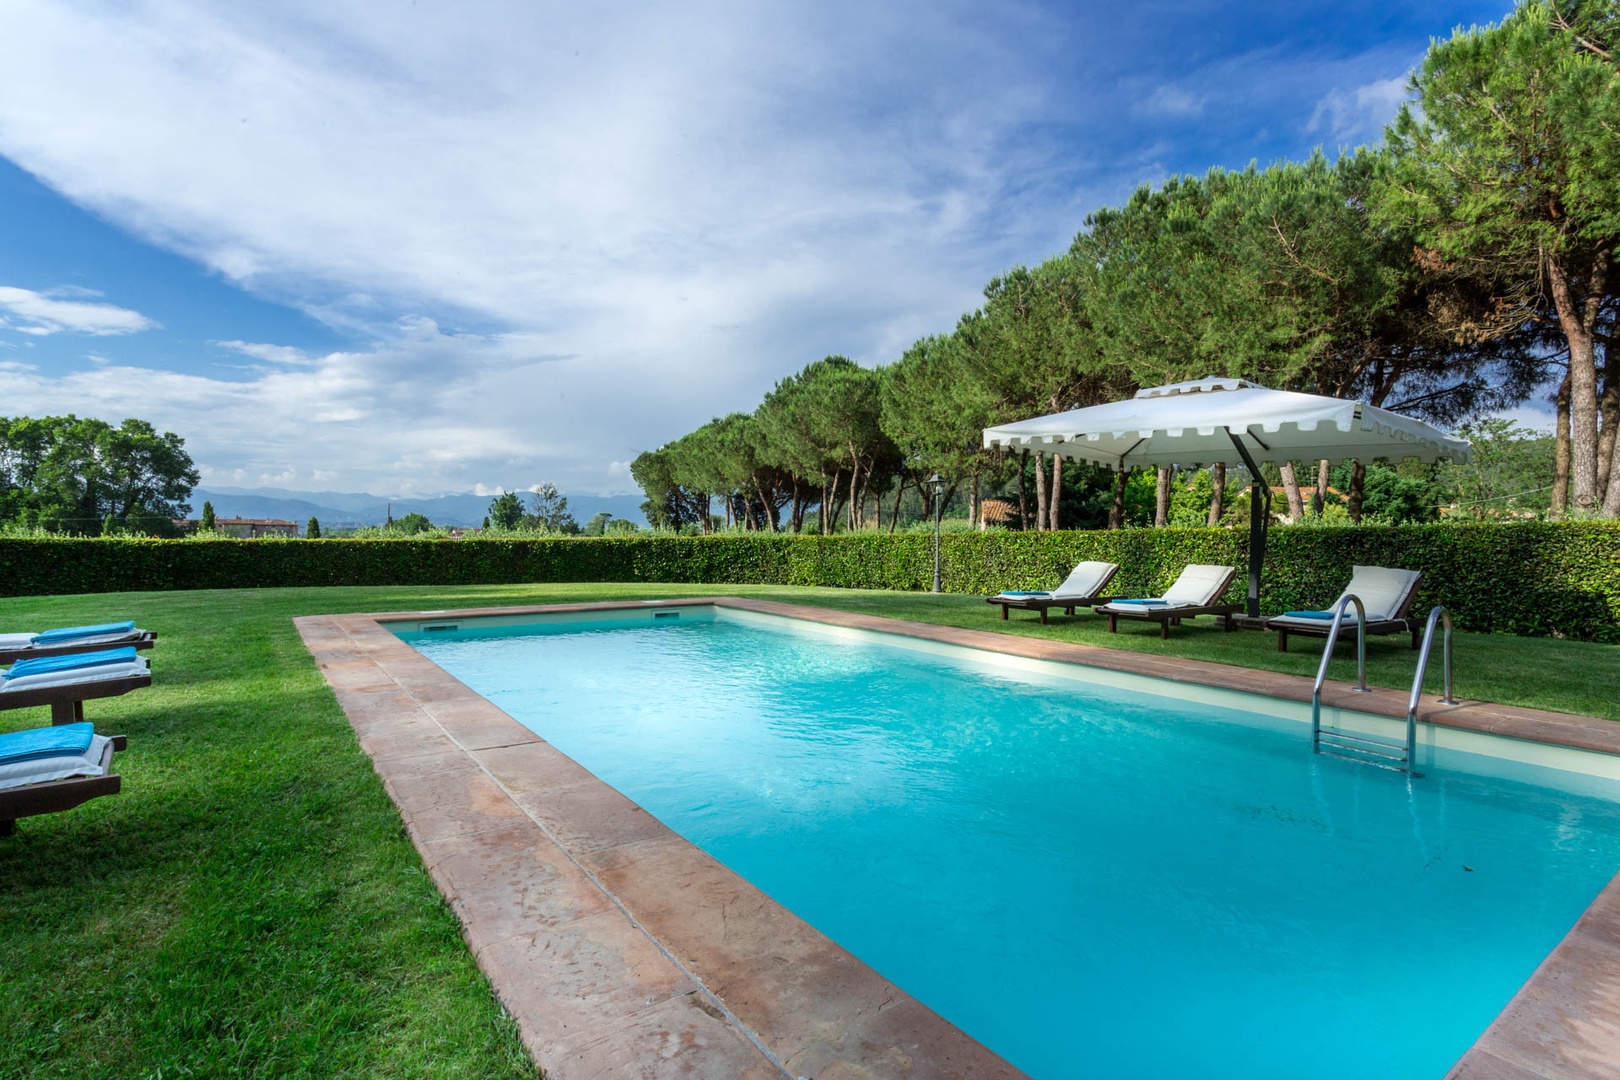 Enjoy fantastic views of the valley and Tuscan countryside while relaxing by the pool